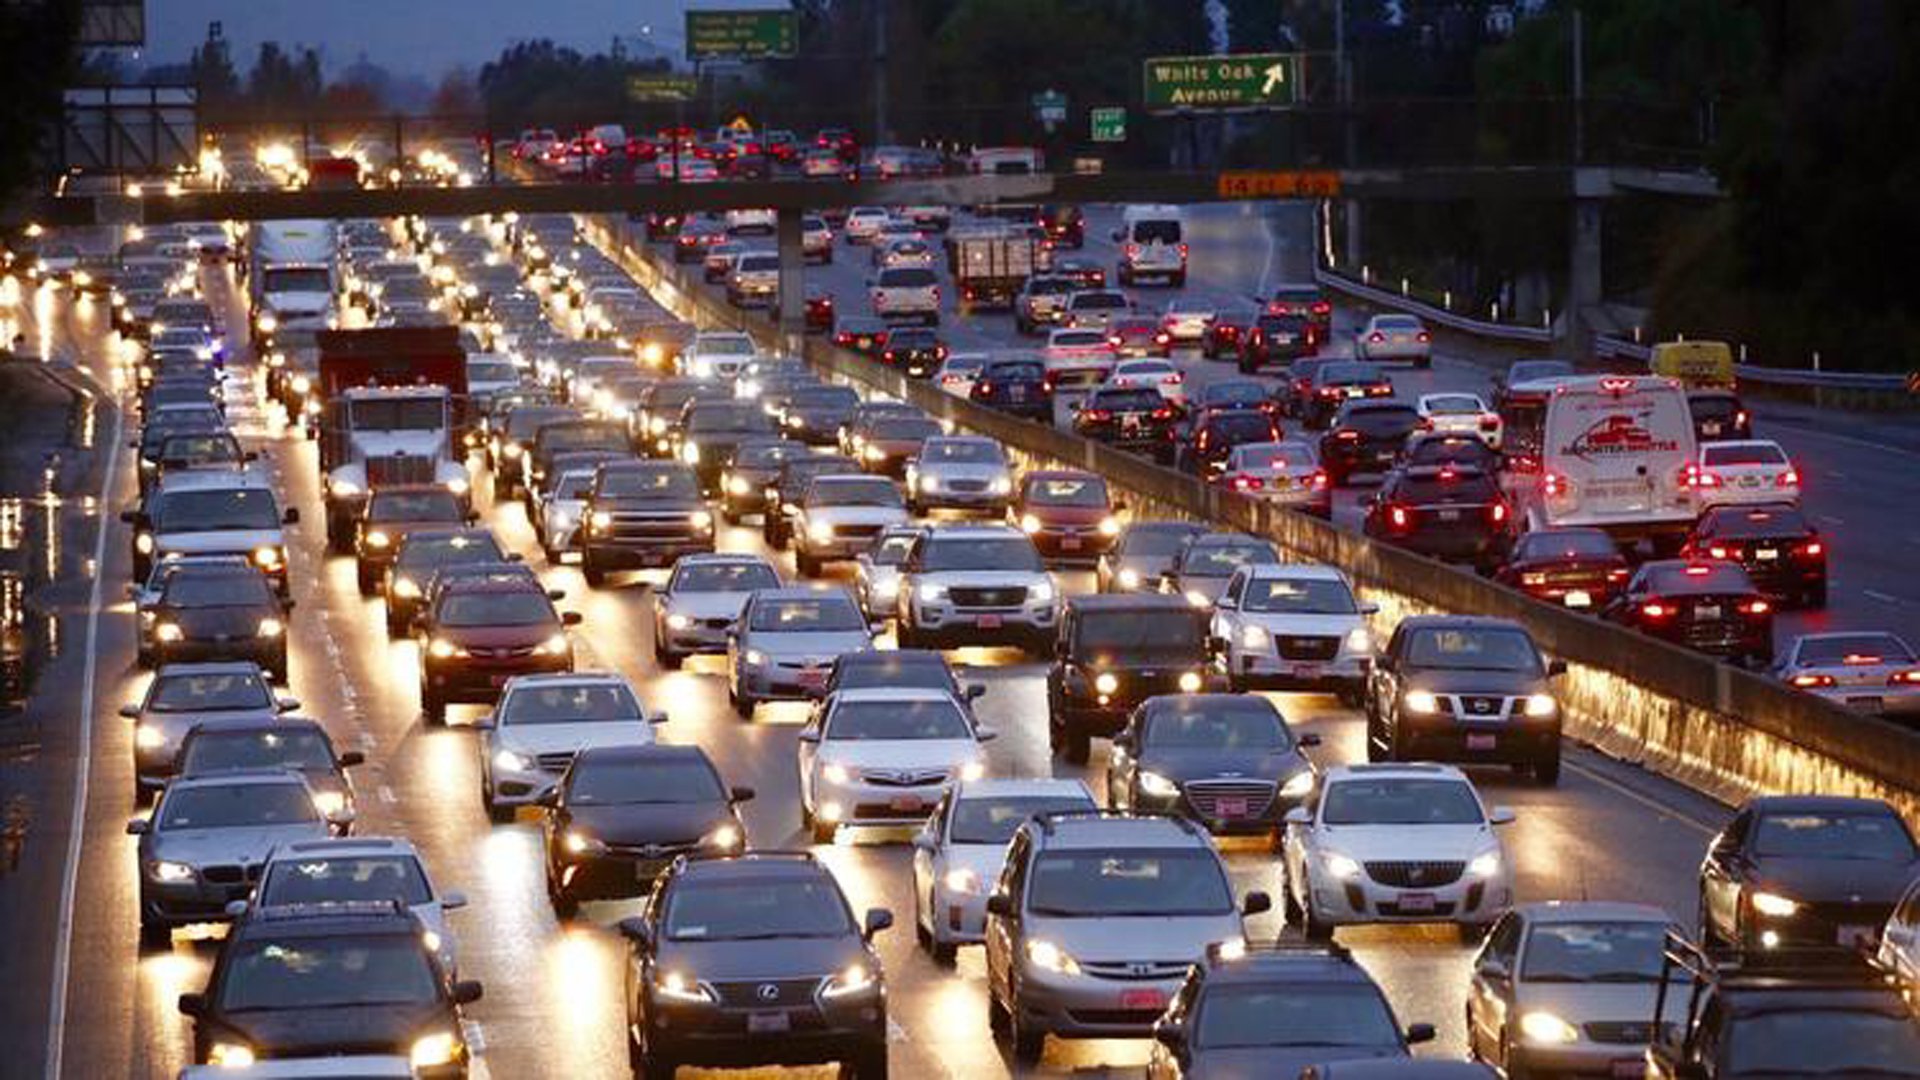 New California Traffic-Related Laws Taking Effect in 2018 Include ...